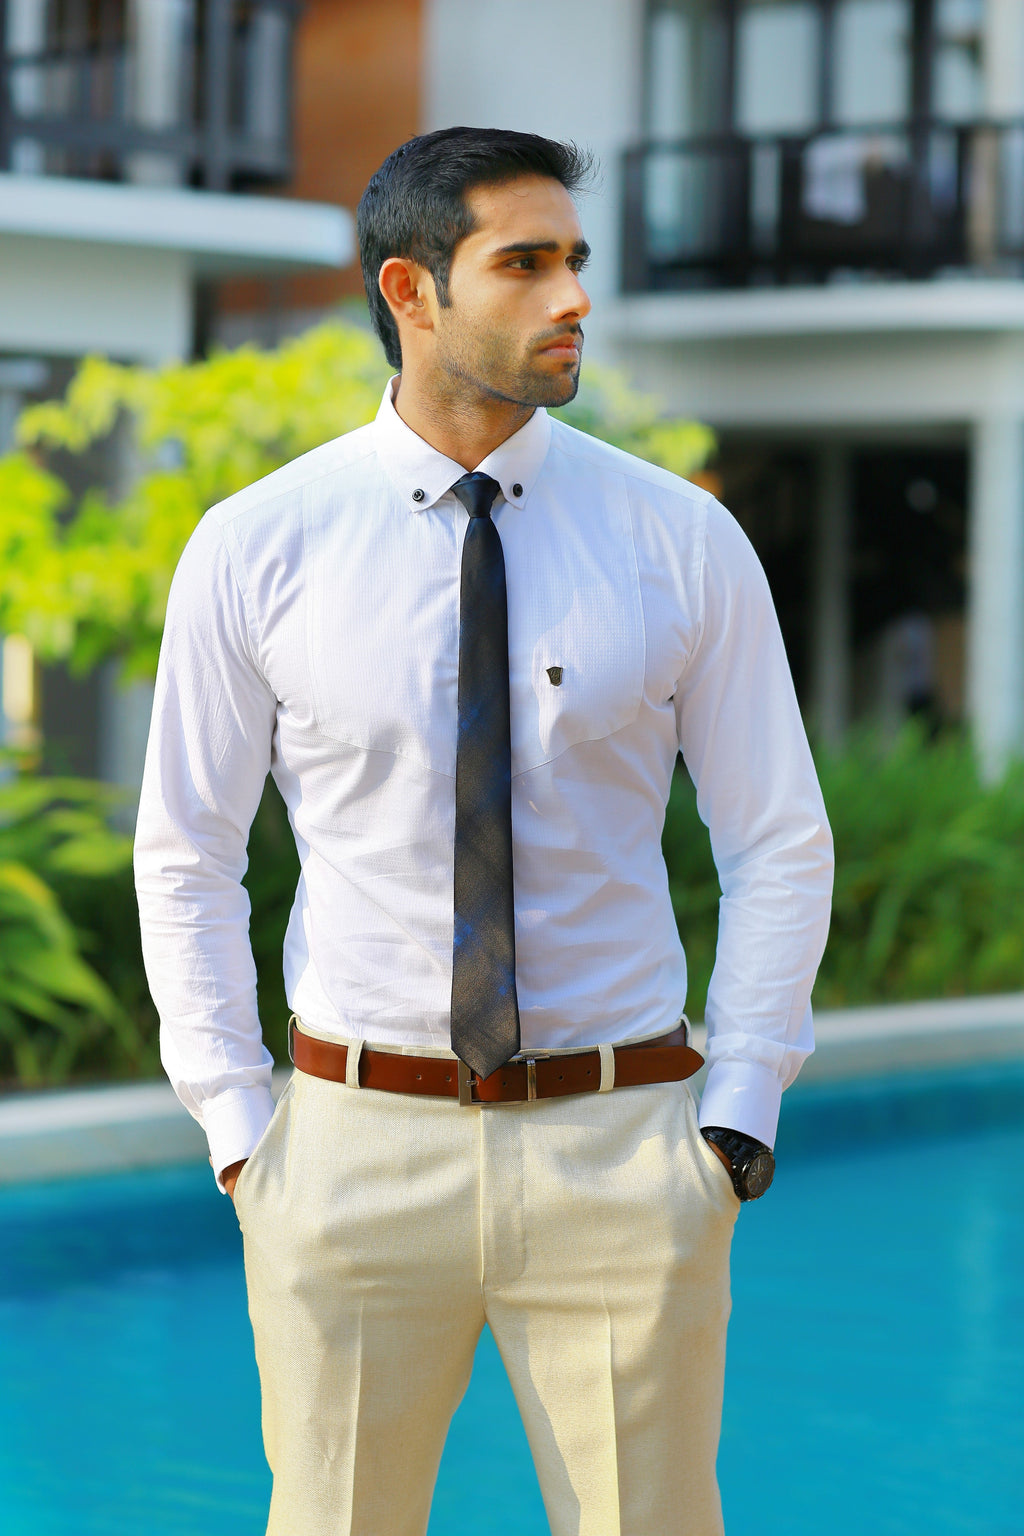 Pearl White Cutaway Collar Shirt with Self Detailing on Chest Shirt    archerslounge